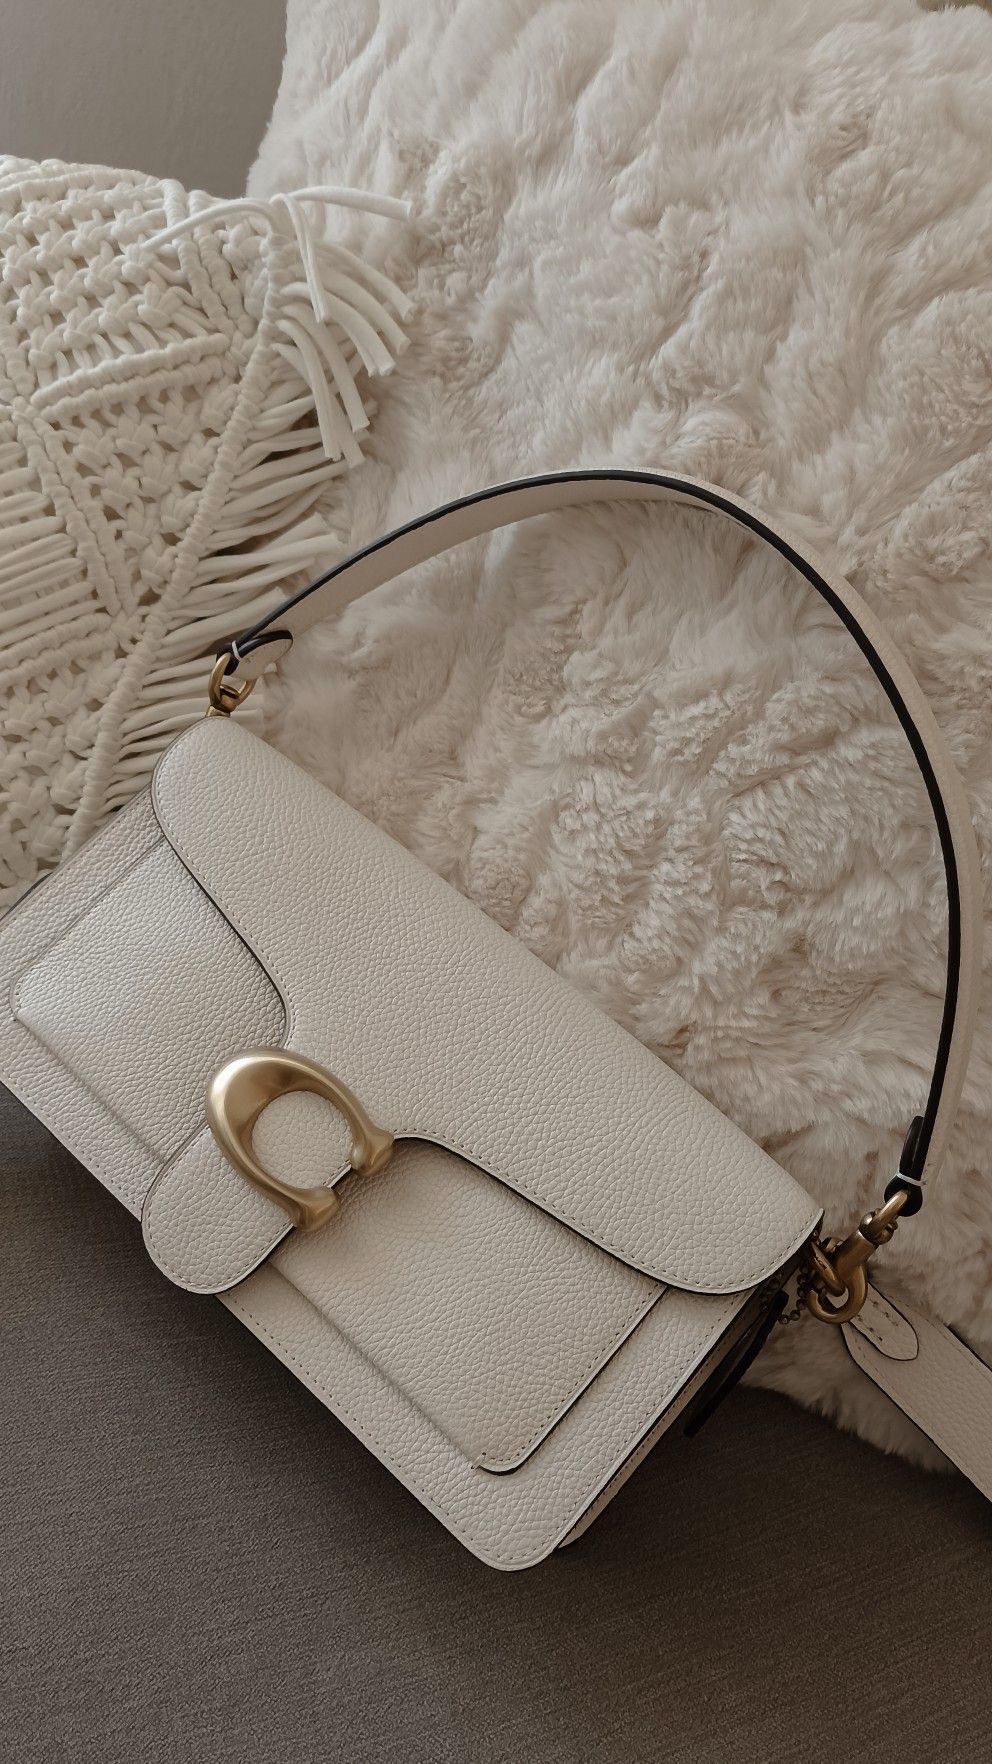 Iconic Style: Coach Bags for Sophisticated Looks